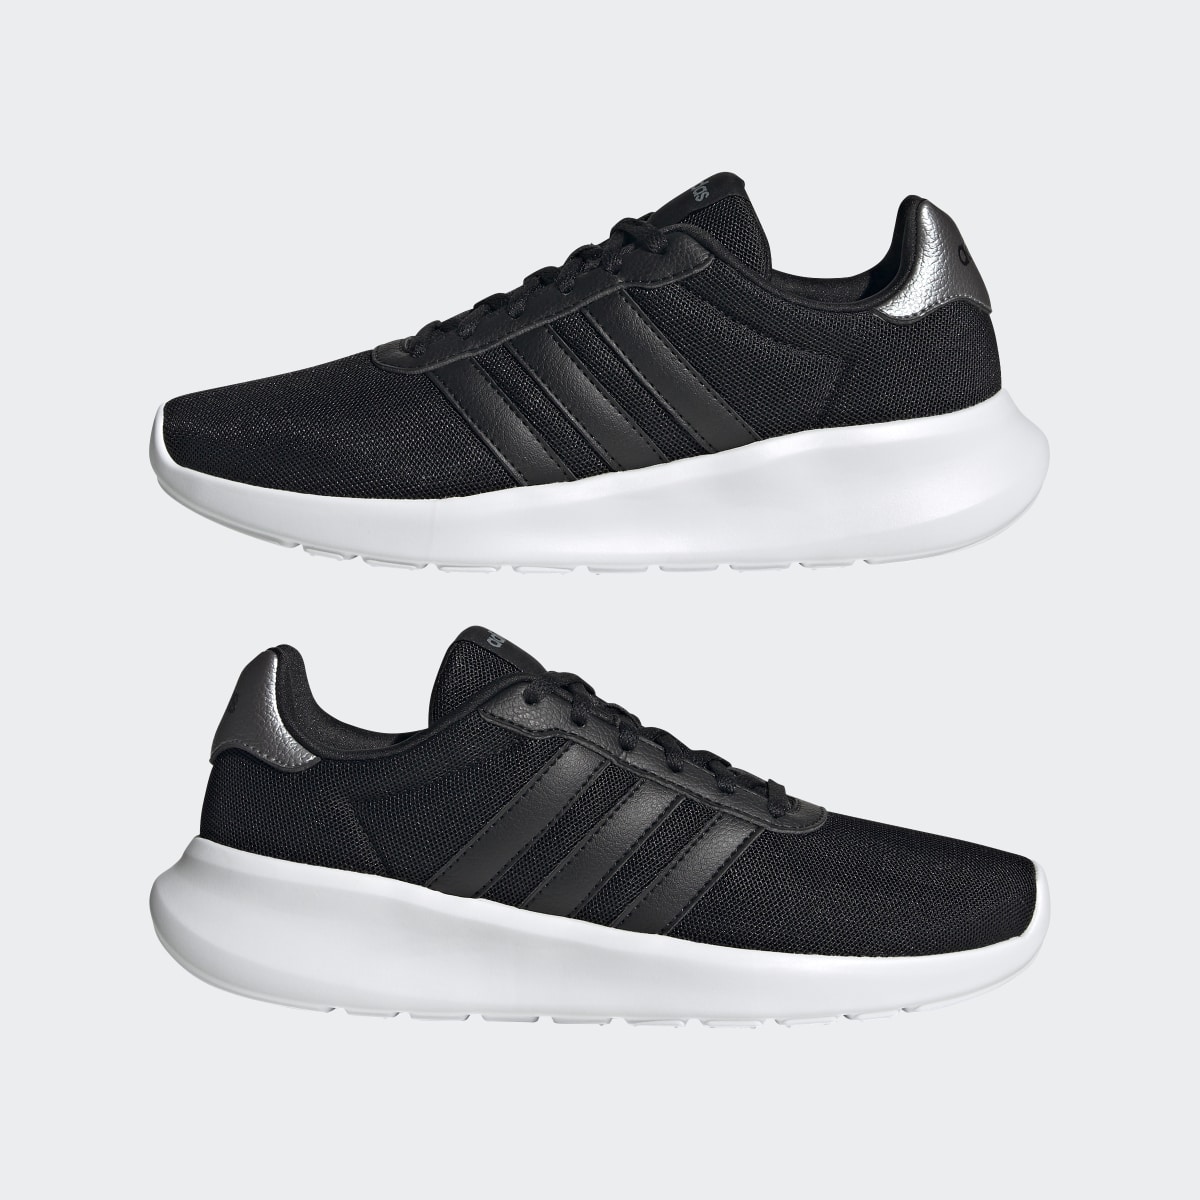 Adidas Lite Racer 3.0 Shoes. 8